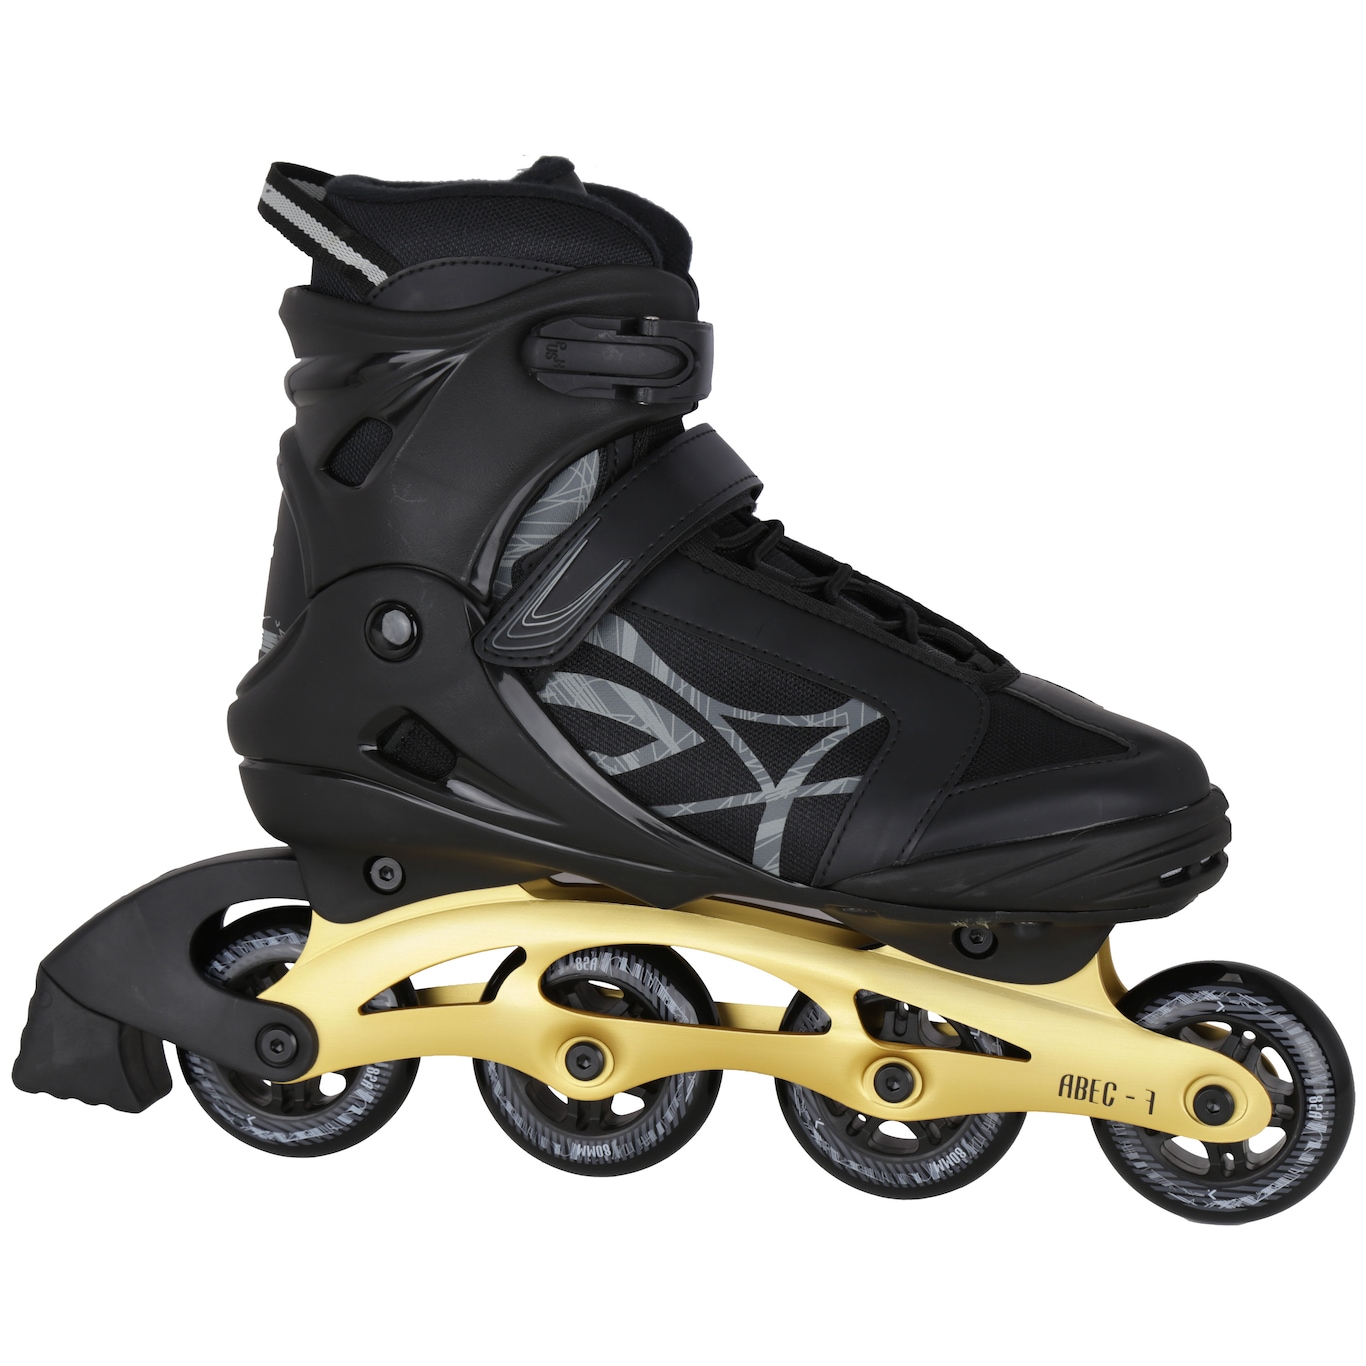 Patins Oxer Byte - In Line - Fitness - ABEC 7 - Adulto - Foto 1